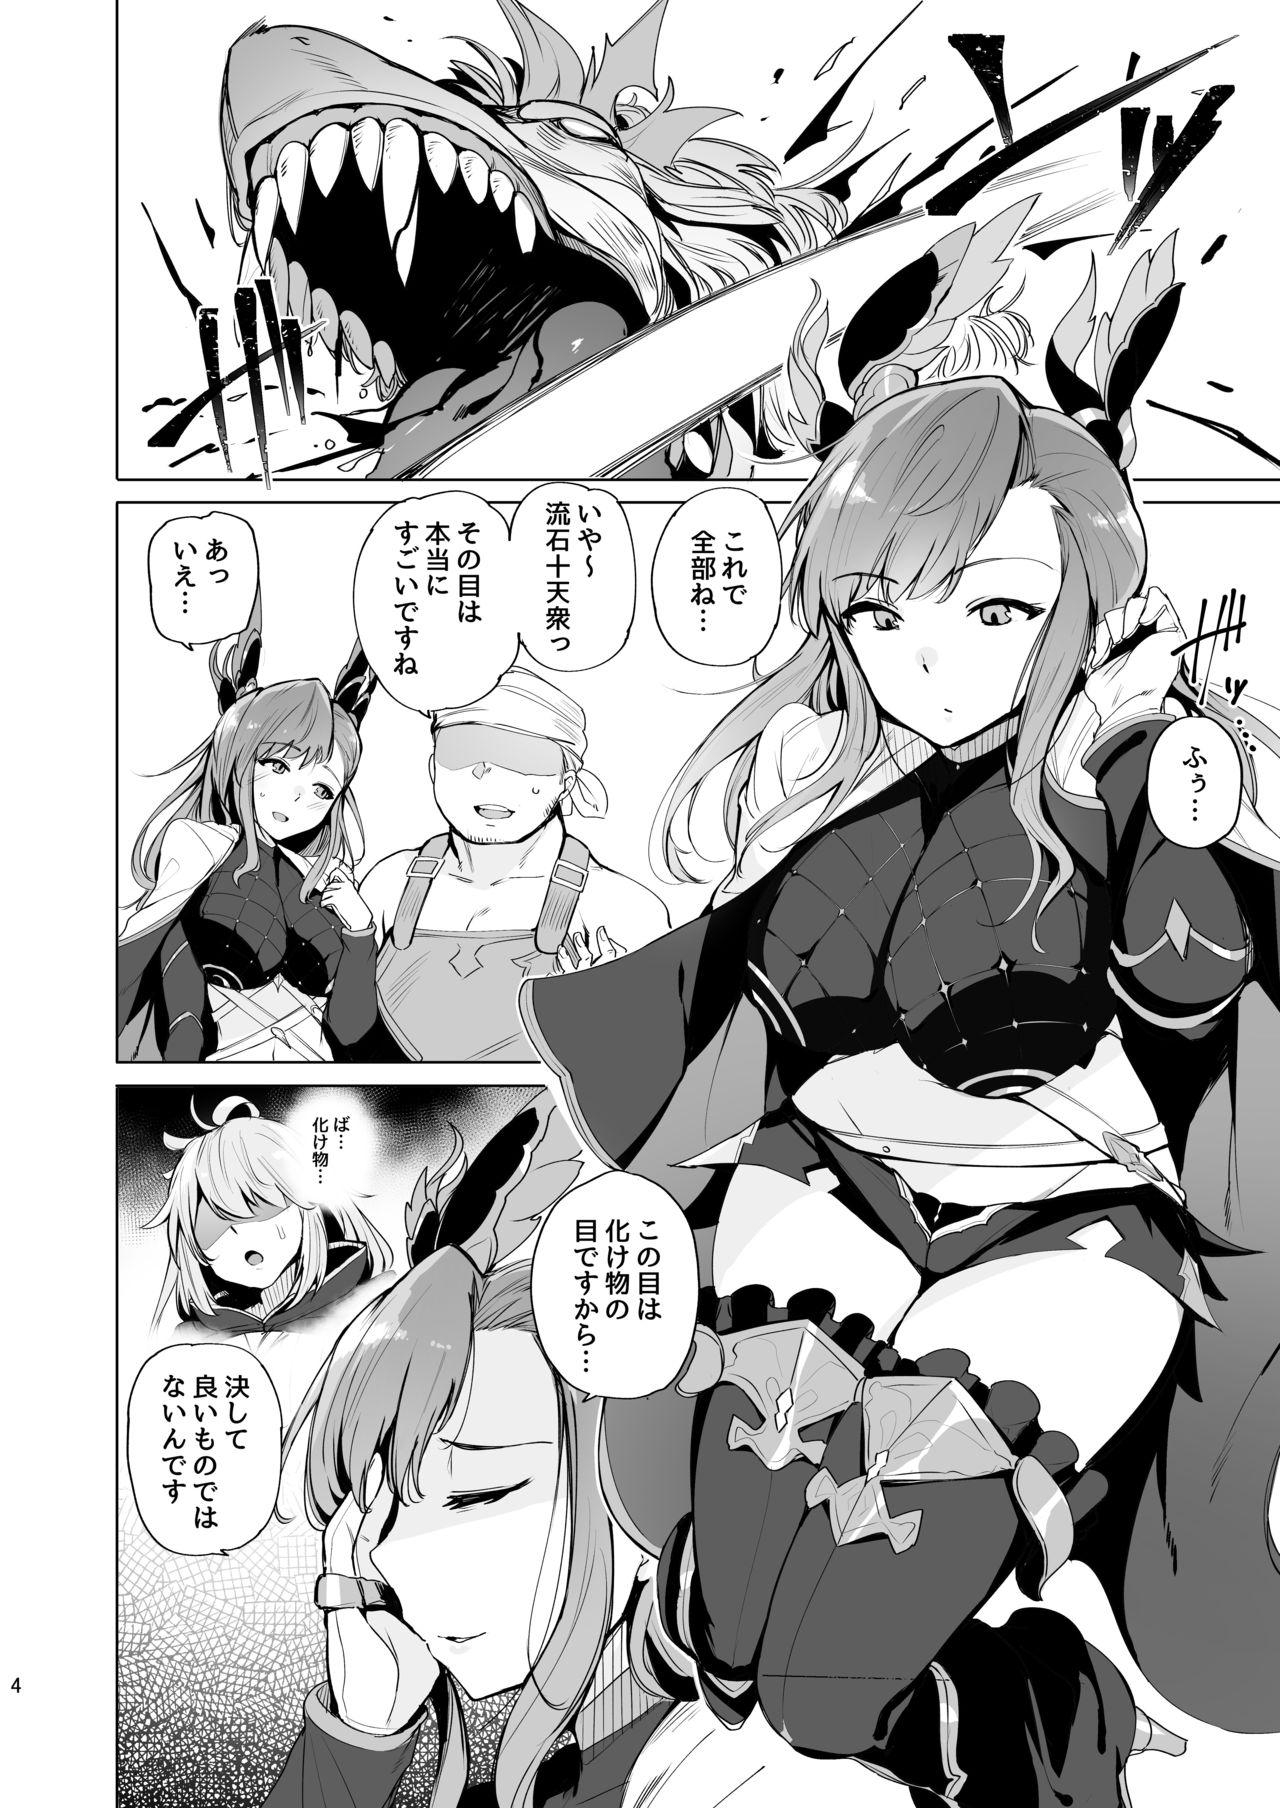 Pussylicking Deep in the eyes - Granblue fantasy Zorra - Page 4